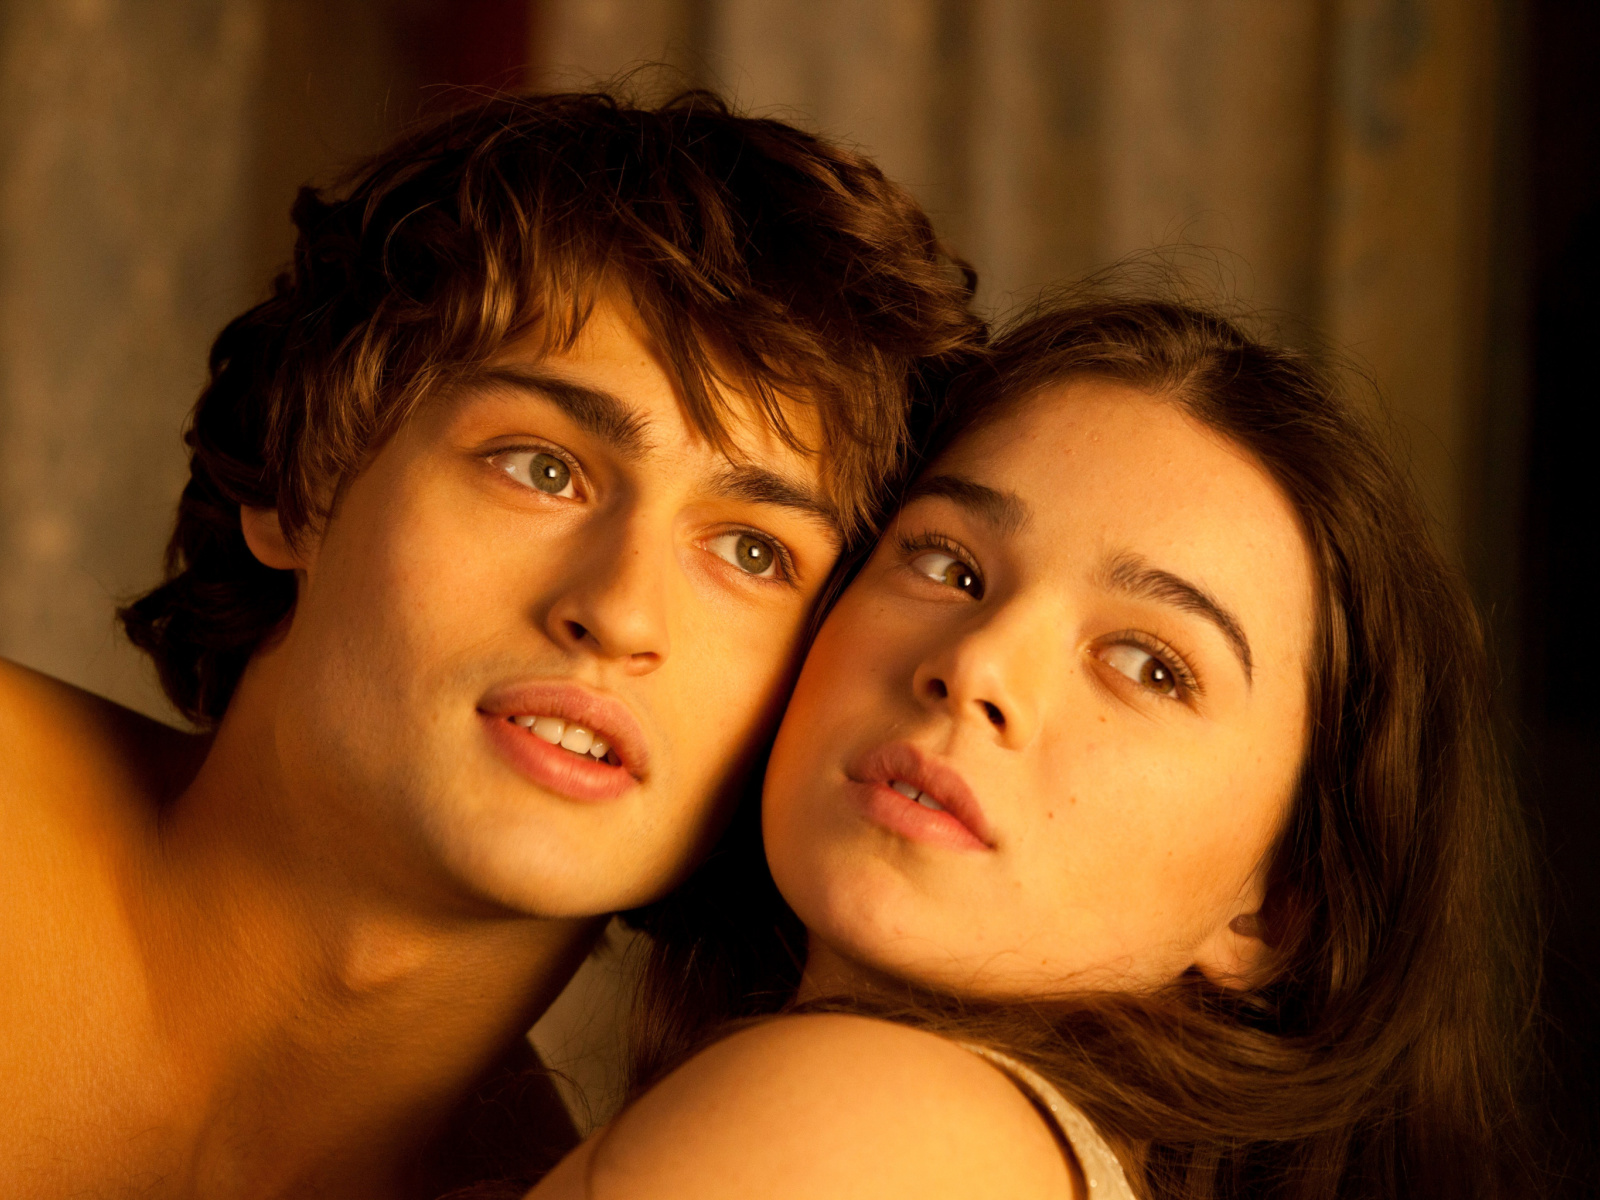 Das Romeo and Juliet with Hailee Steinfeld and Douglas Booth Wallpaper 1600x1200